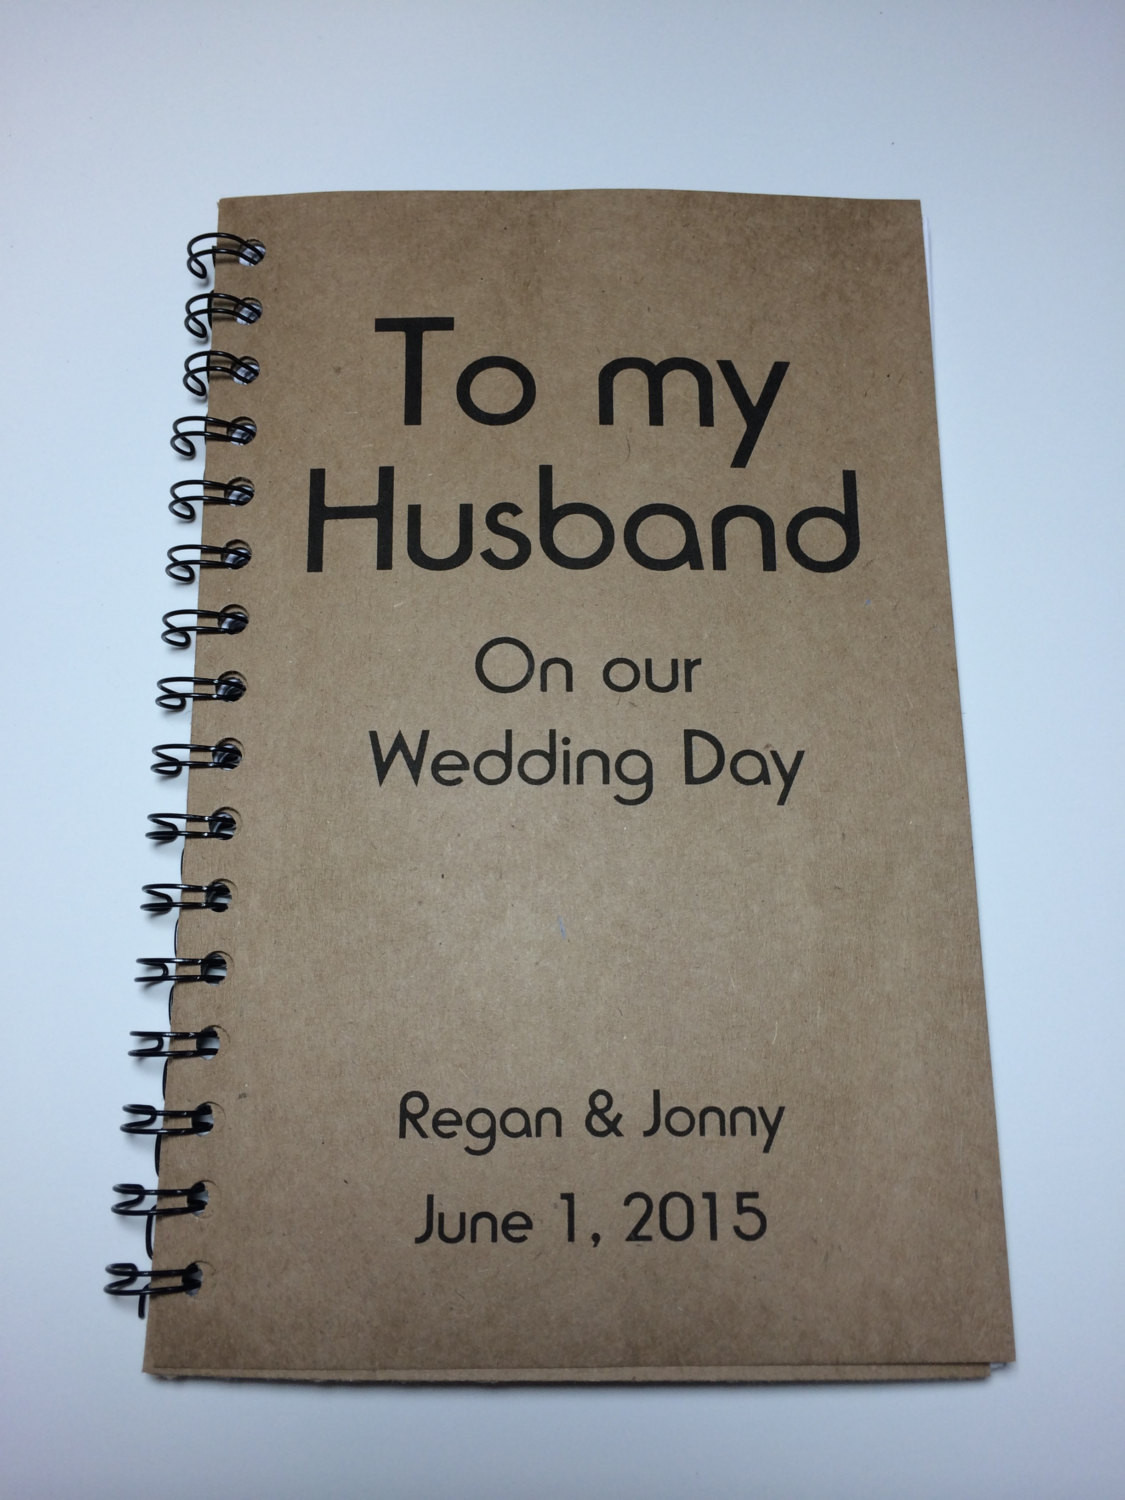 Gift Ideas For Husband On Wedding Day
 To my Husband on our Wedding Day Journal Notebook